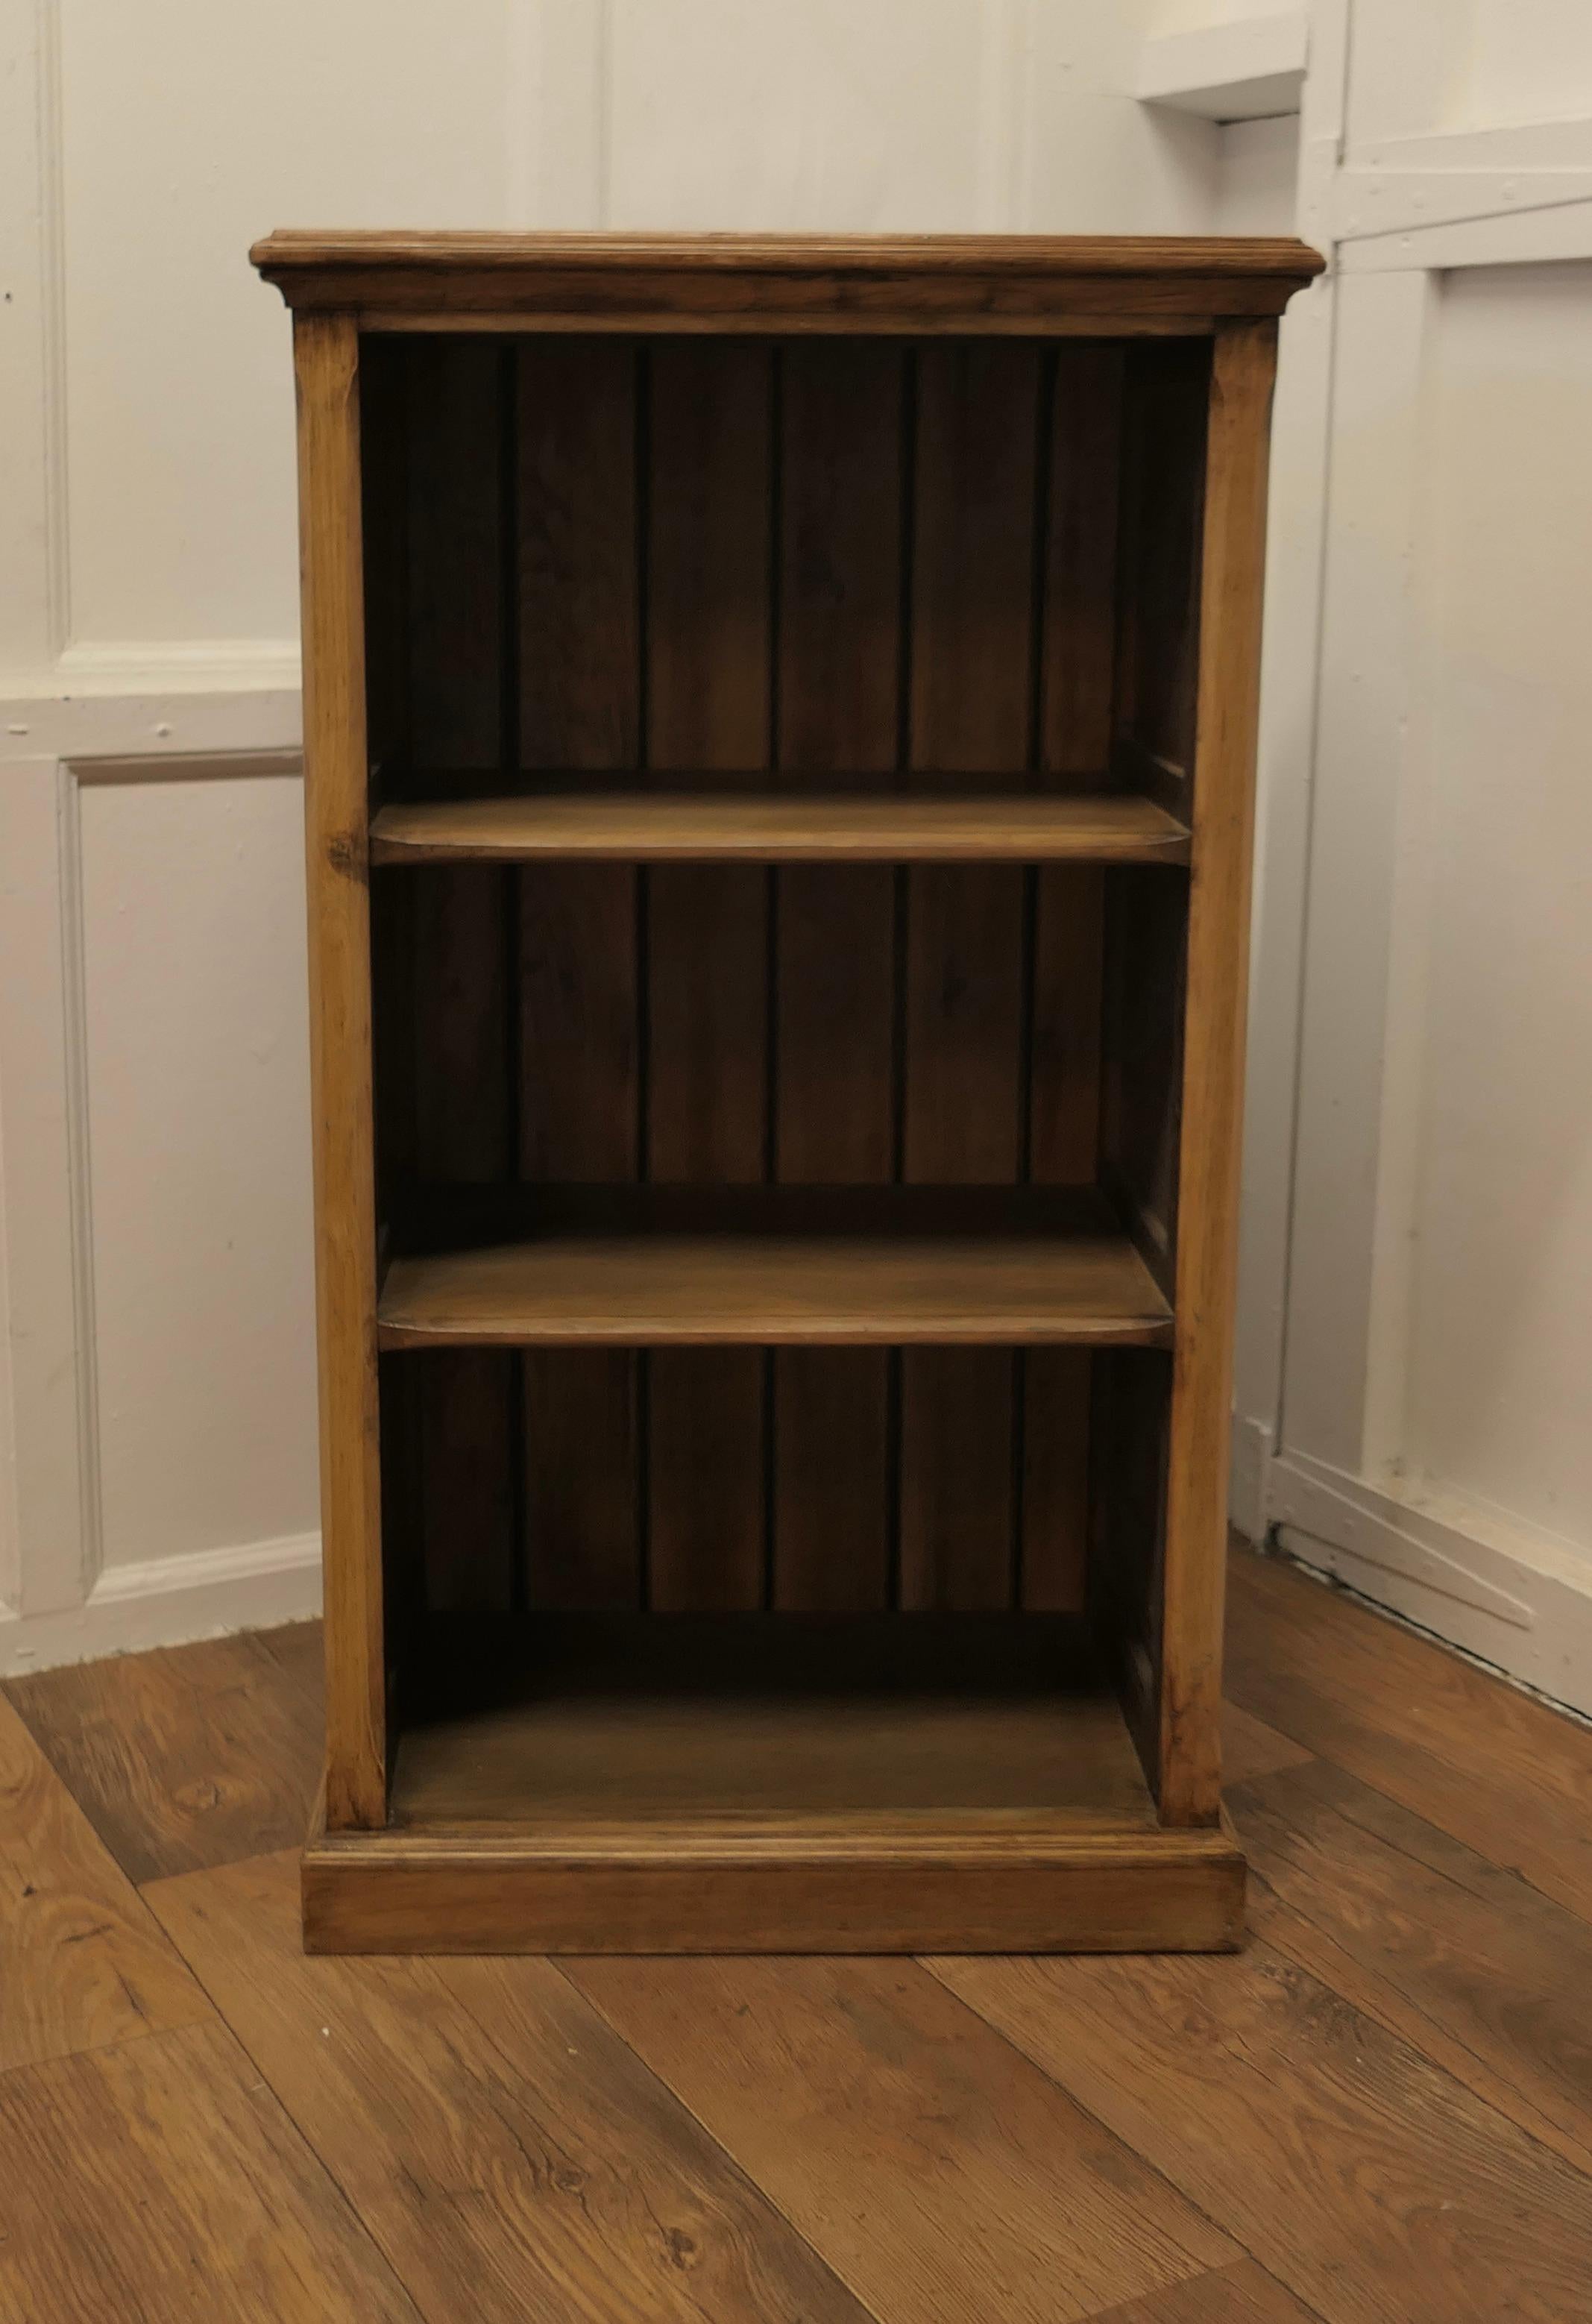 A Superb Arts and Crafts Golden Oak Open Shelves   In Good Condition For Sale In Chillerton, Isle of Wight